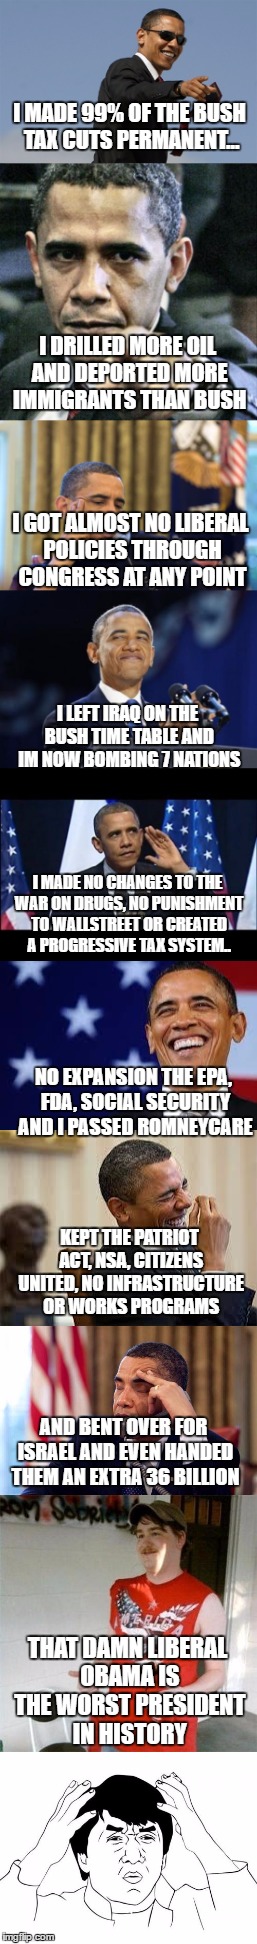 'Obama is the worst president in history because he did almost exactly what a republican president would do'  -republicans | I MADE 99% OF THE BUSH TAX CUTS PERMANENT... I DRILLED MORE OIL AND DEPORTED MORE IMMIGRANTS THAN BUSH; I GOT ALMOST NO LIBERAL POLICIES THROUGH CONGRESS AT ANY POINT; I LEFT IRAQ ON THE BUSH TIME TABLE AND IM NOW BOMBING 7 NATIONS; I MADE NO CHANGES TO THE WAR ON DRUGS, NO PUNISHMENT TO WALLSTREET OR CREATED A PROGRESSIVE TAX SYSTEM.. NO EXPANSION THE EPA, FDA, SOCIAL SECURITY AND I PASSED ROMNEYCARE; KEPT THE PATRIOT ACT, NSA, CITIZENS UNITED, NO INFRASTRUCTURE OR WORKS PROGRAMS; AND BENT OVER FOR ISRAEL AND EVEN HANDED THEM AN EXTRA 36 BILLION; THAT DAMN LIBERAL OBAMA IS THE WORST PRESIDENT IN HISTORY | image tagged in obama | made w/ Imgflip meme maker